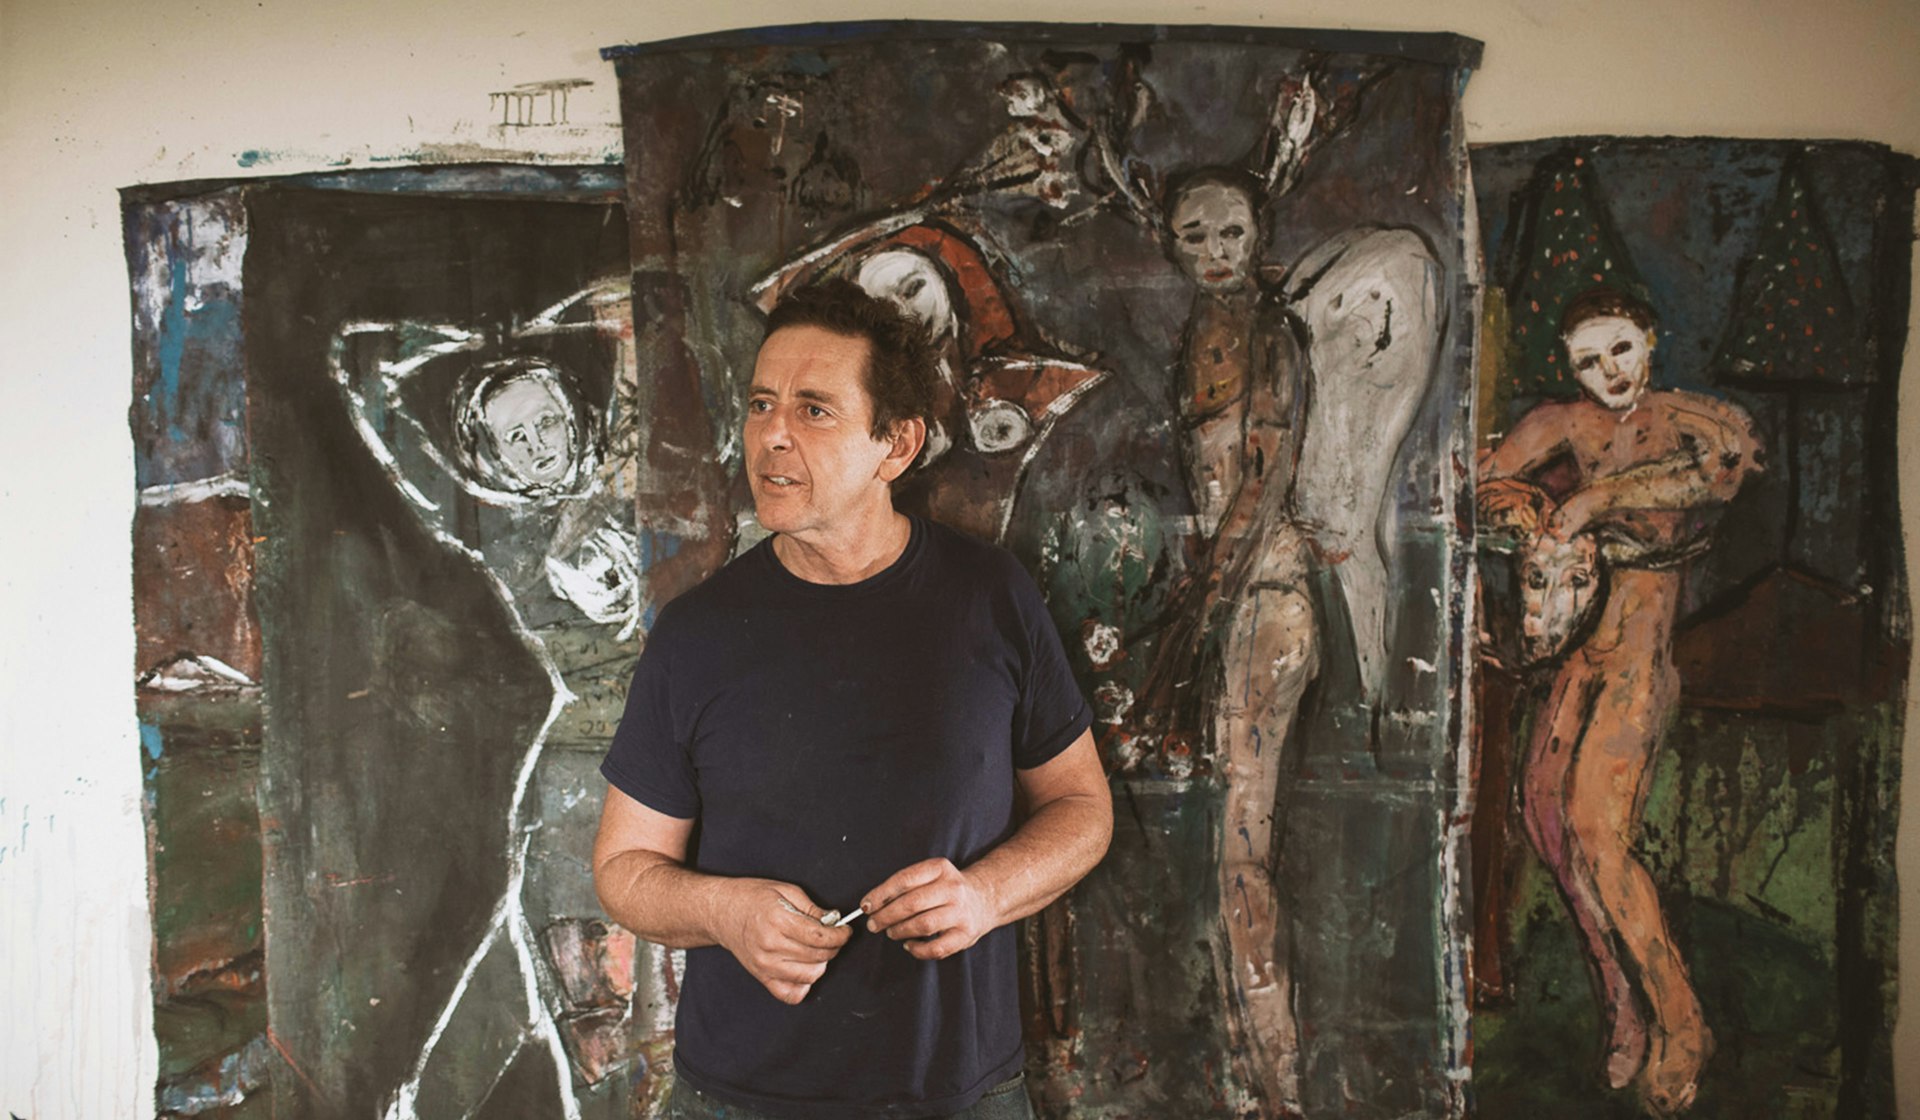 The prisoner who found freedom behind bars by becoming a painter